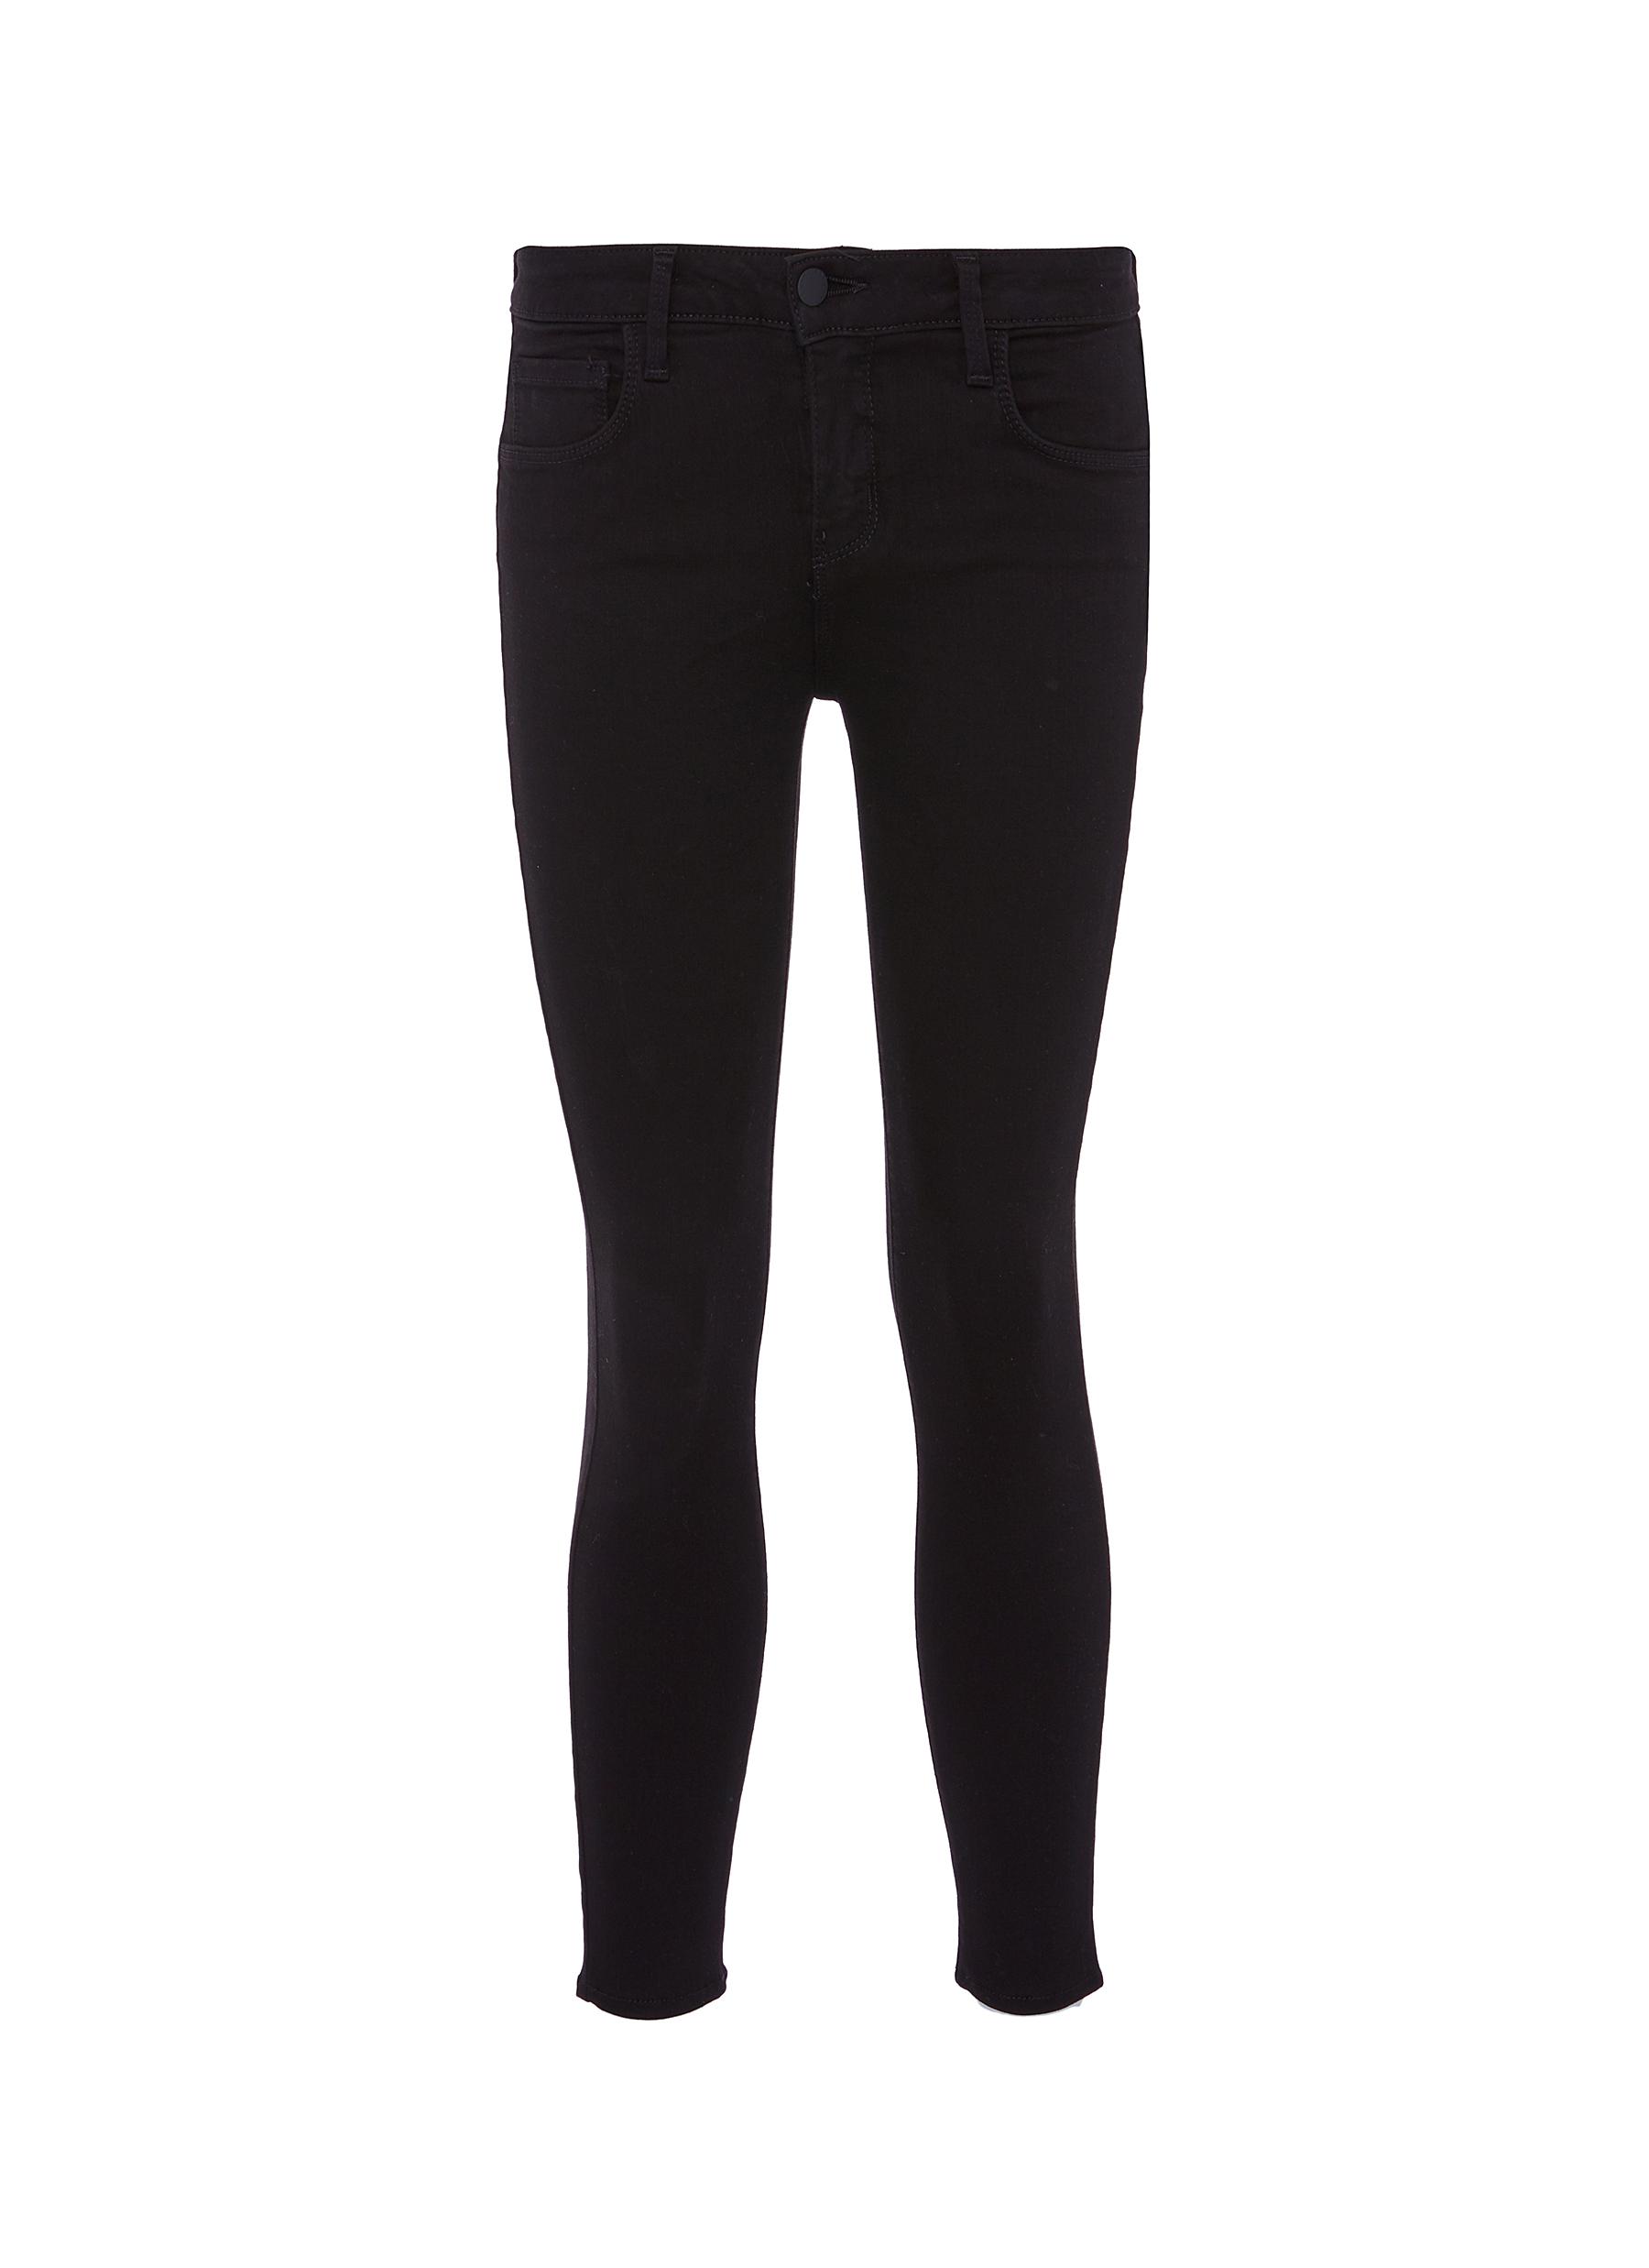 Mazzy skinny jeans by L'Agence